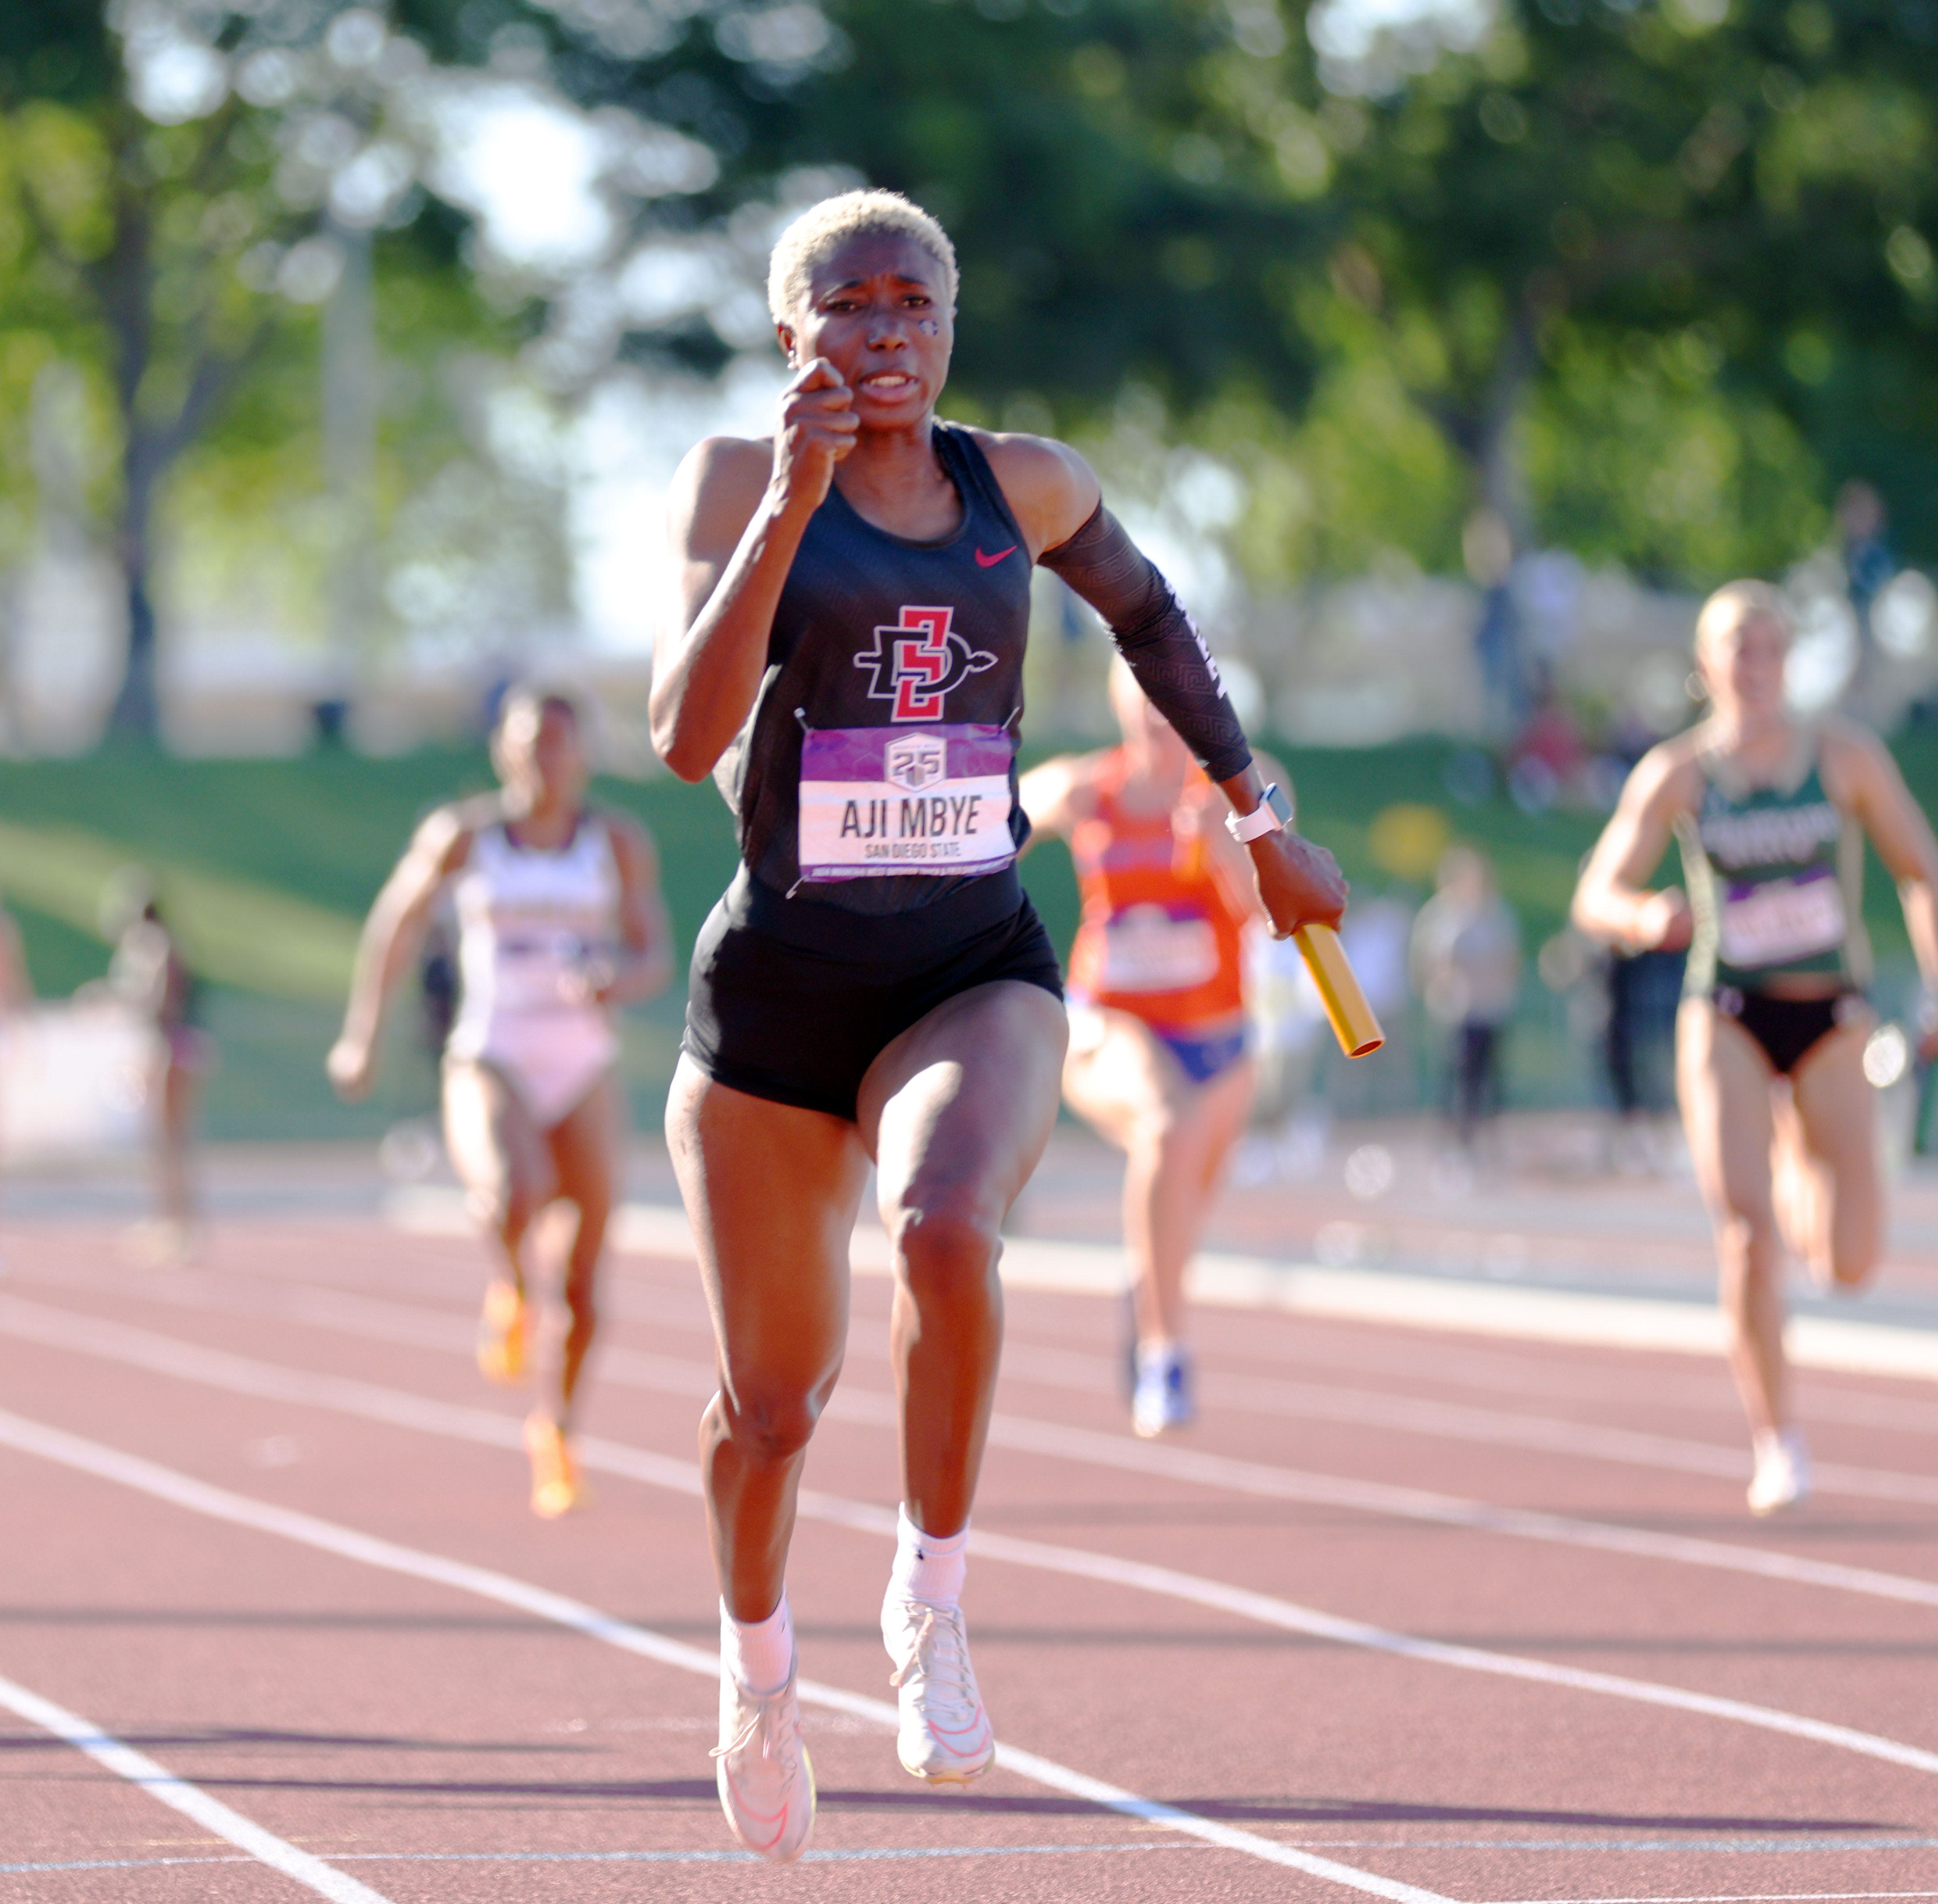 Former Broadfording track star Aji Mbye to compete at NCAA championships